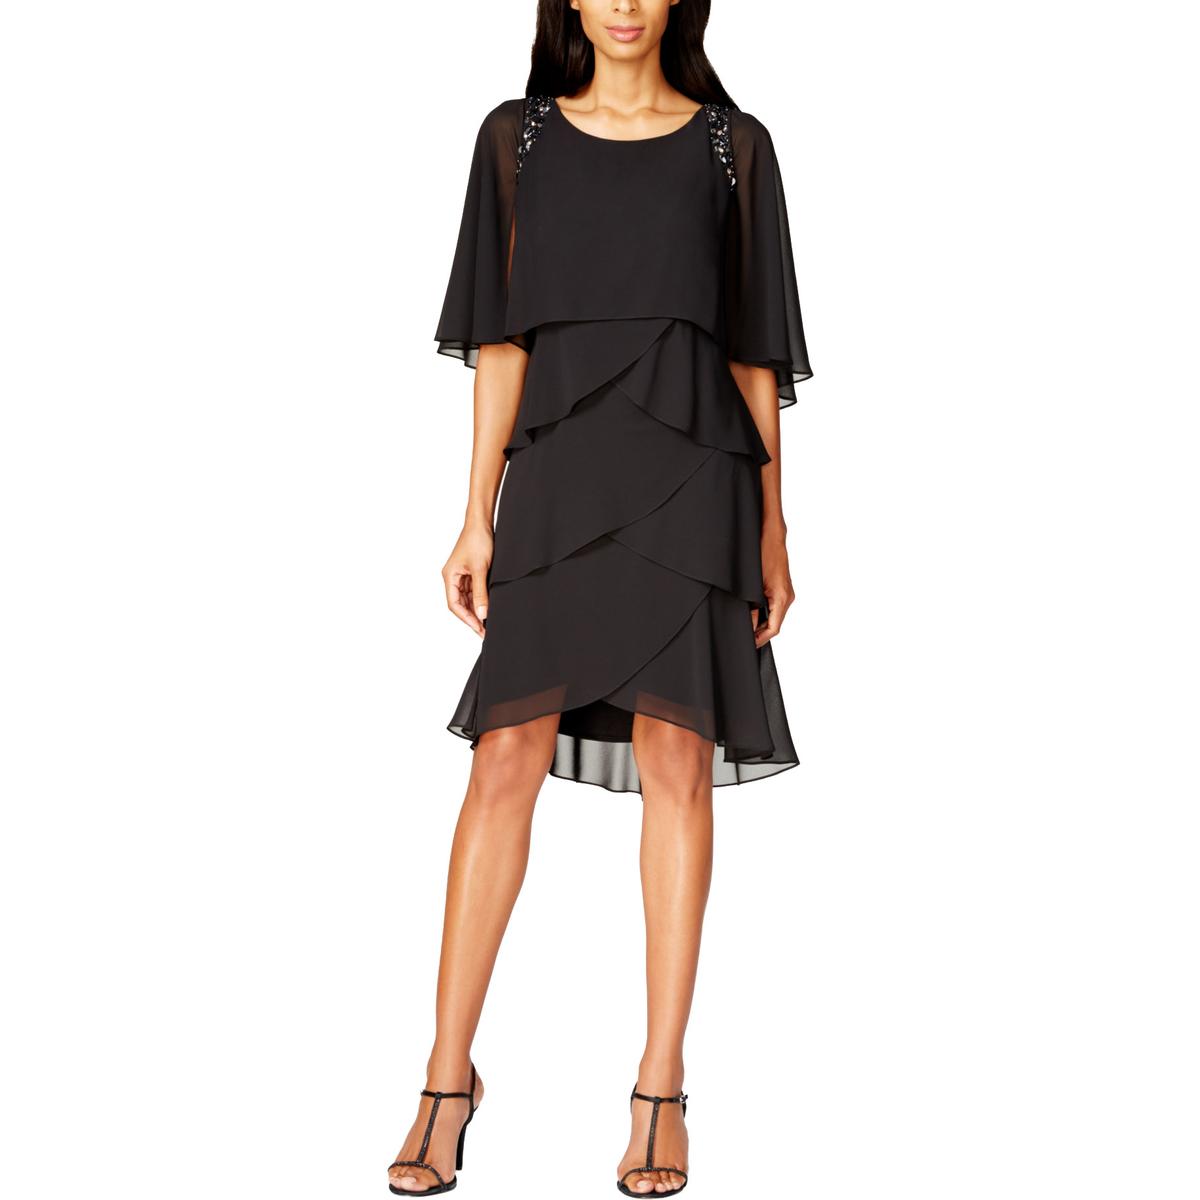 SLNY Womens Black Tiered Embellished Cocktail Party Dress Plus 18 BHFO ...